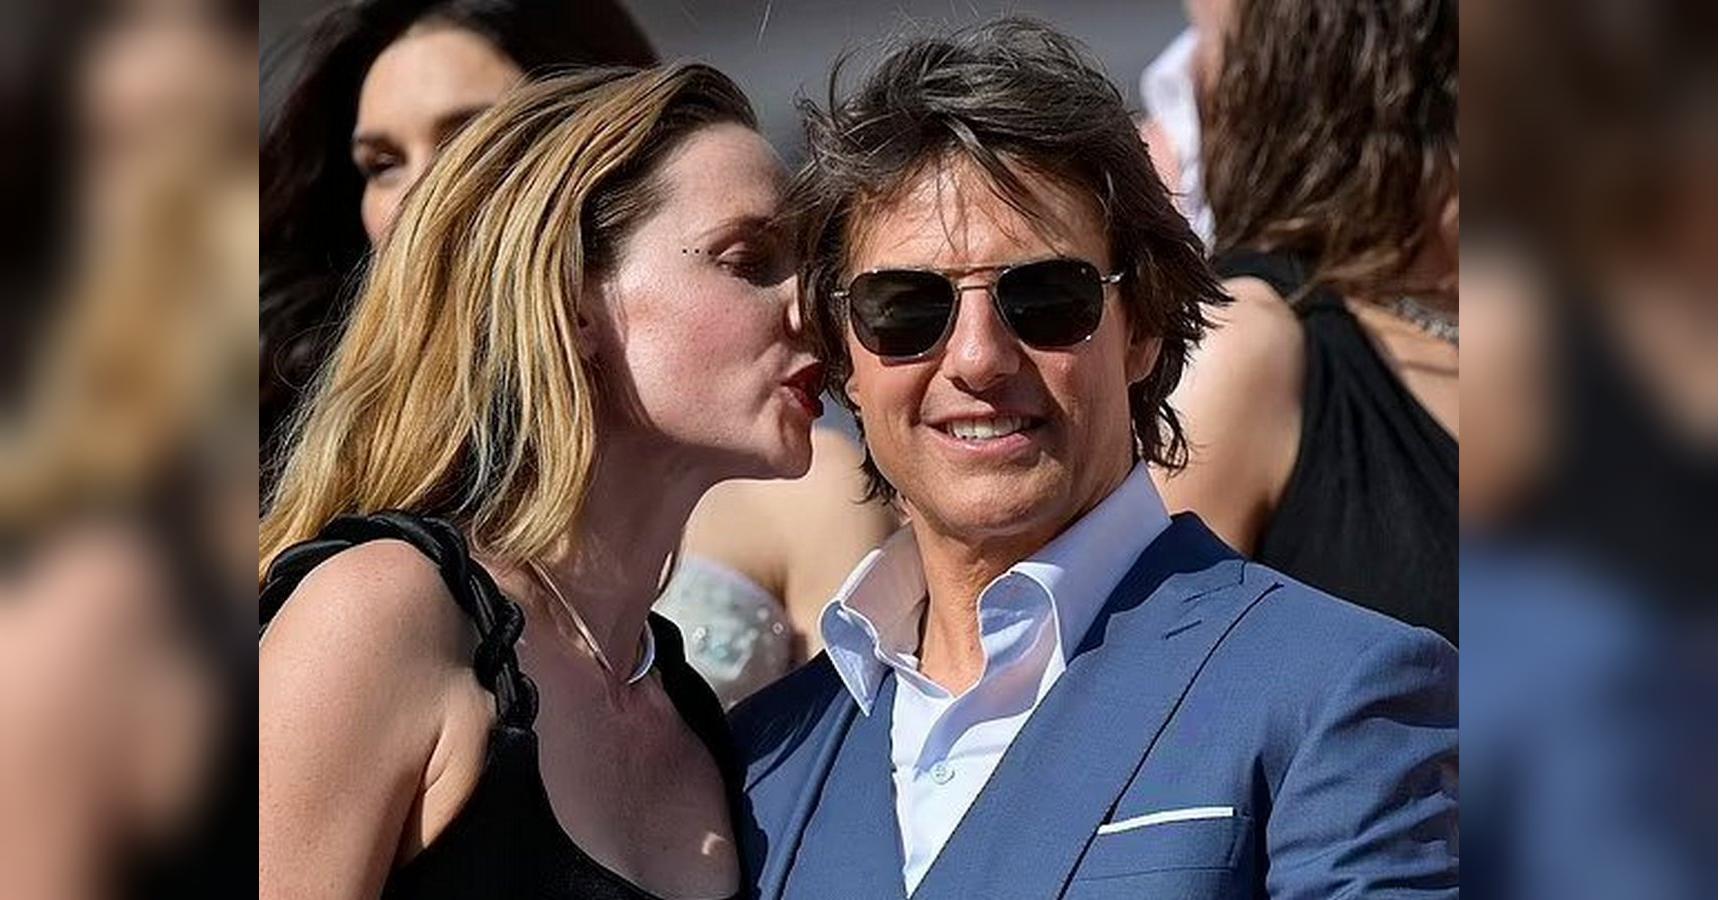 The premiere of the film Mission: Impossible 7 took place in Rome ...